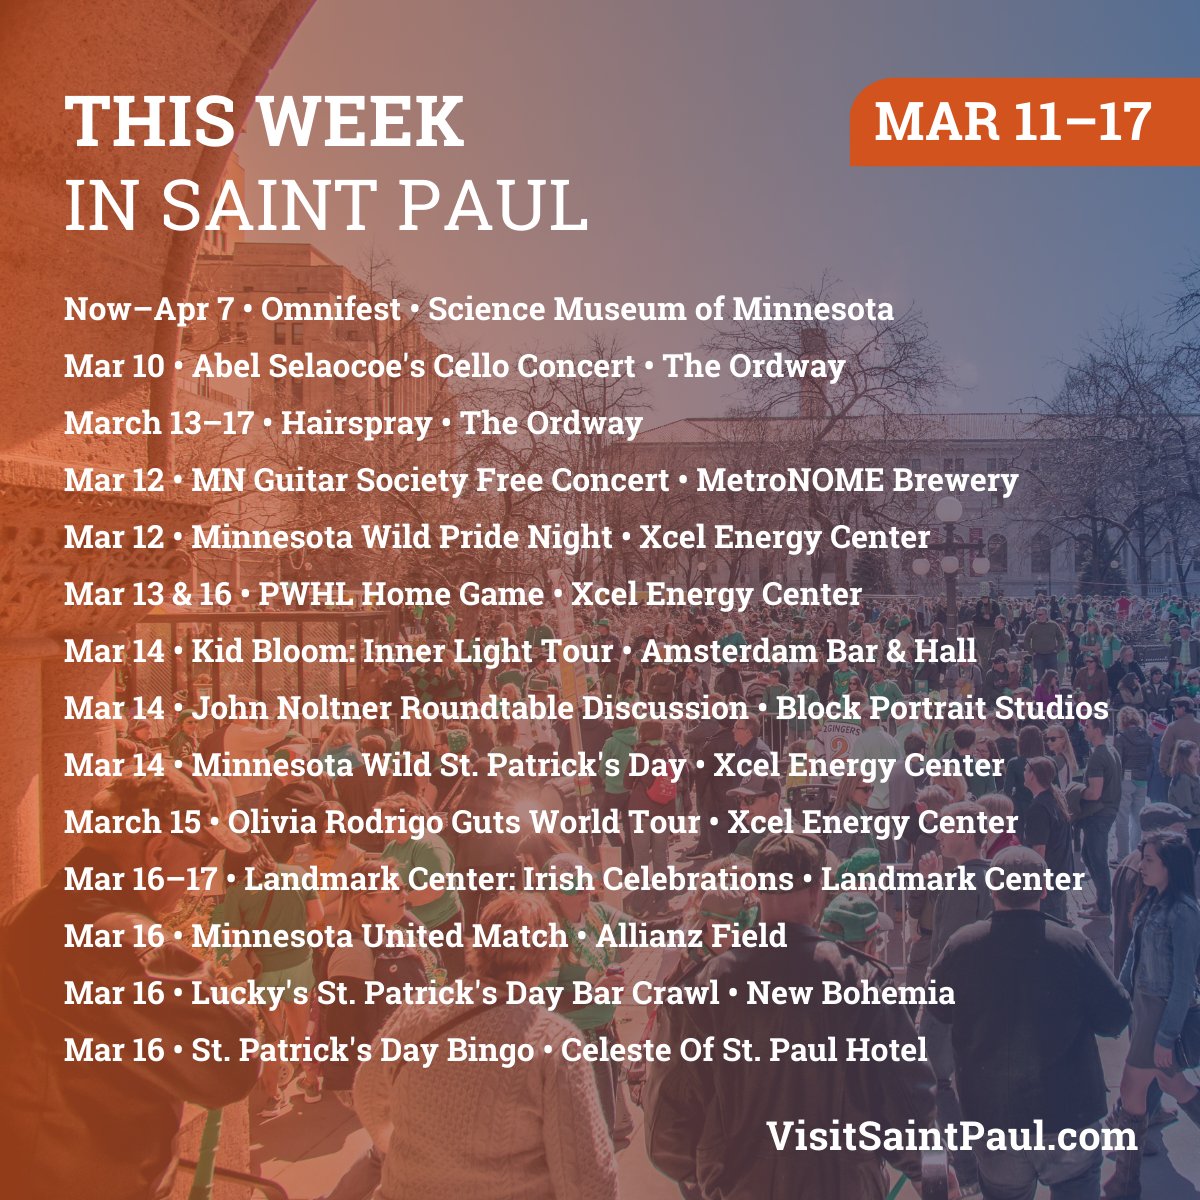 From musical performances to St. Patrick’s Day shenanigans, we’ve got a #MySaintPaul lineup that’s sure to fill your week! 🎵💚 Subscribe to our newsletters for updates on upcoming events and much more » bit.ly/3PbXSol #VisitSaintPaul #SaintPaul #SaintPaulMN #StPaul